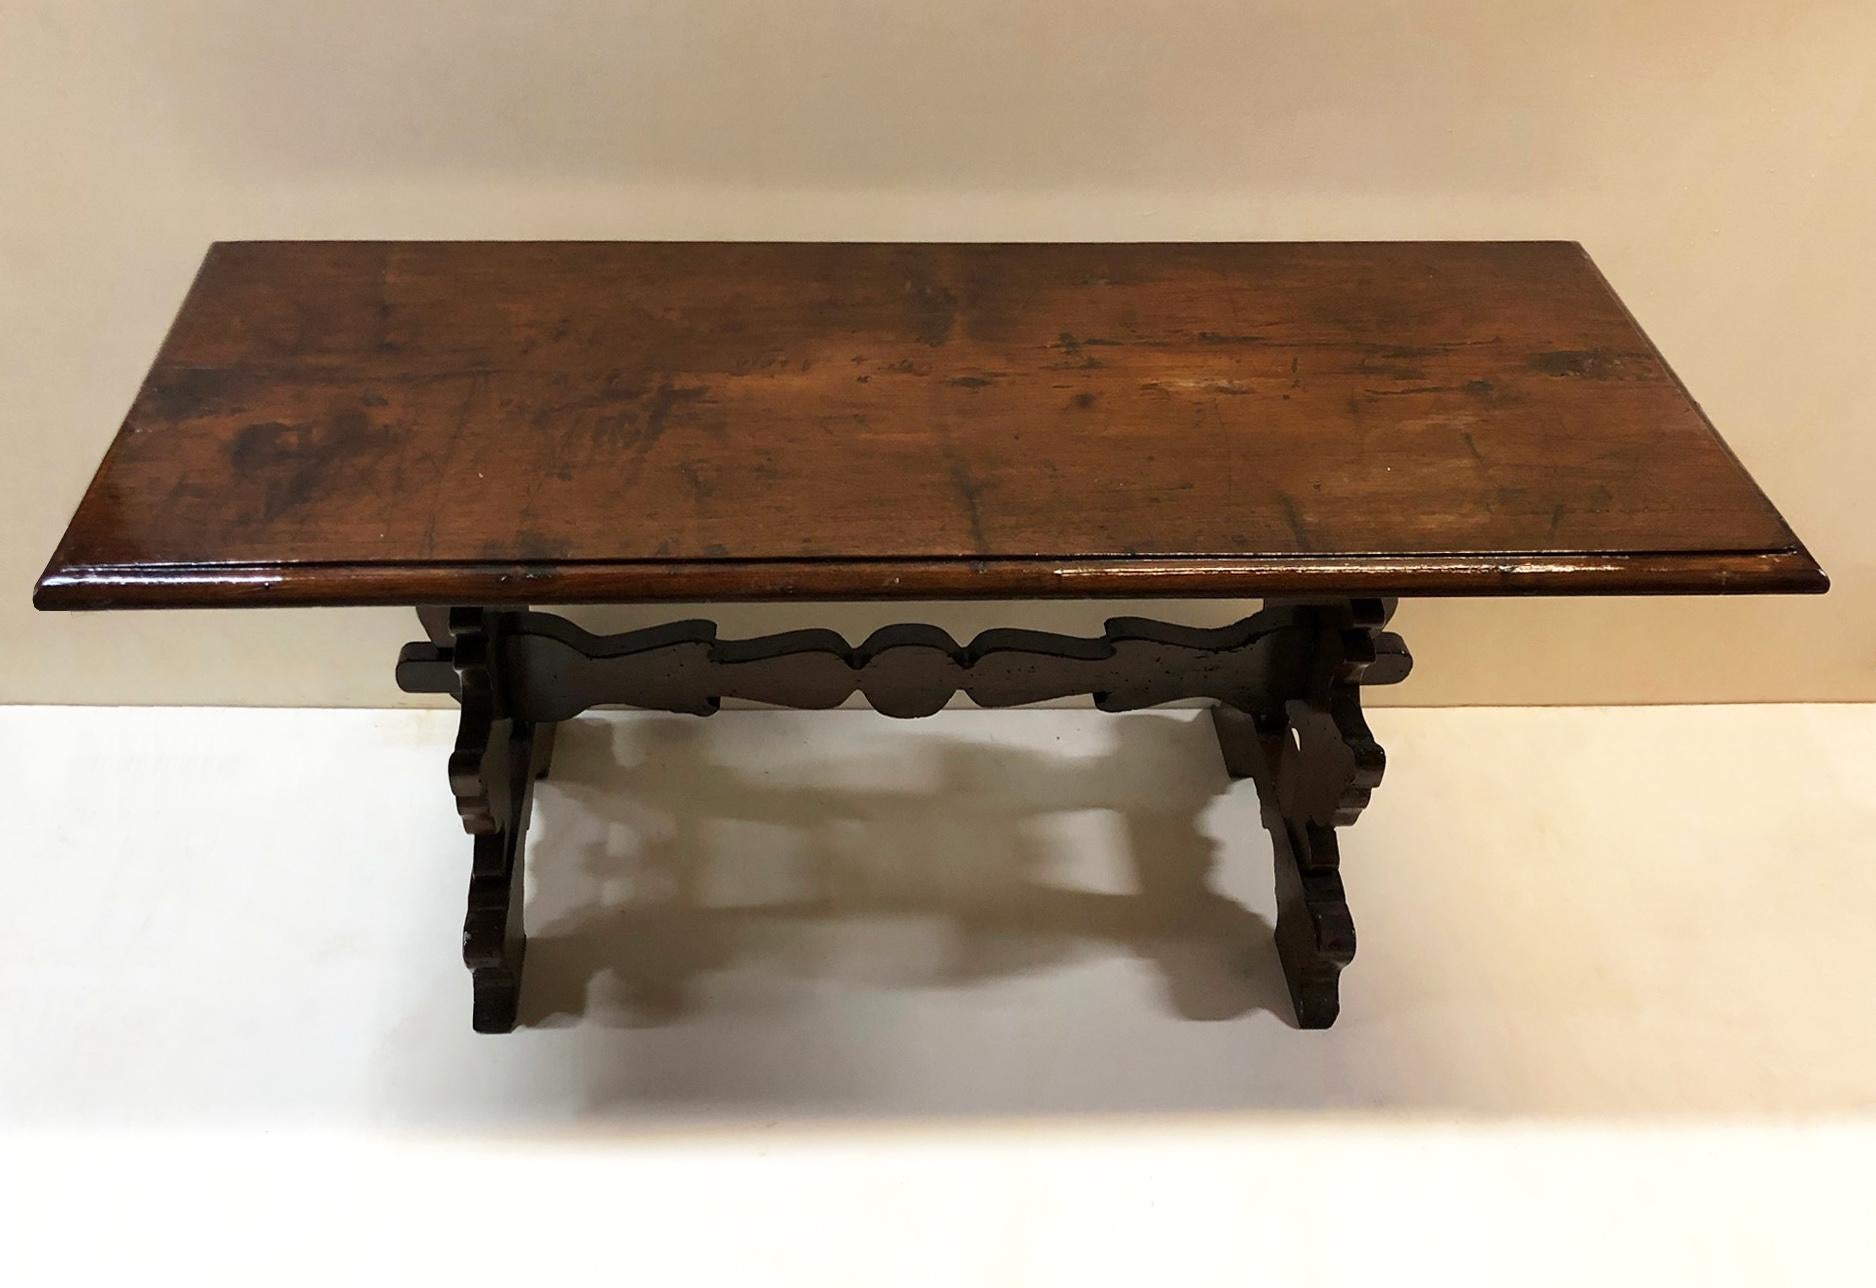 1880s sofa table, in original Italian antique solid walnut.
The transport quote for the USA and Canada is customized according to the destination, make the request with zip code and city.